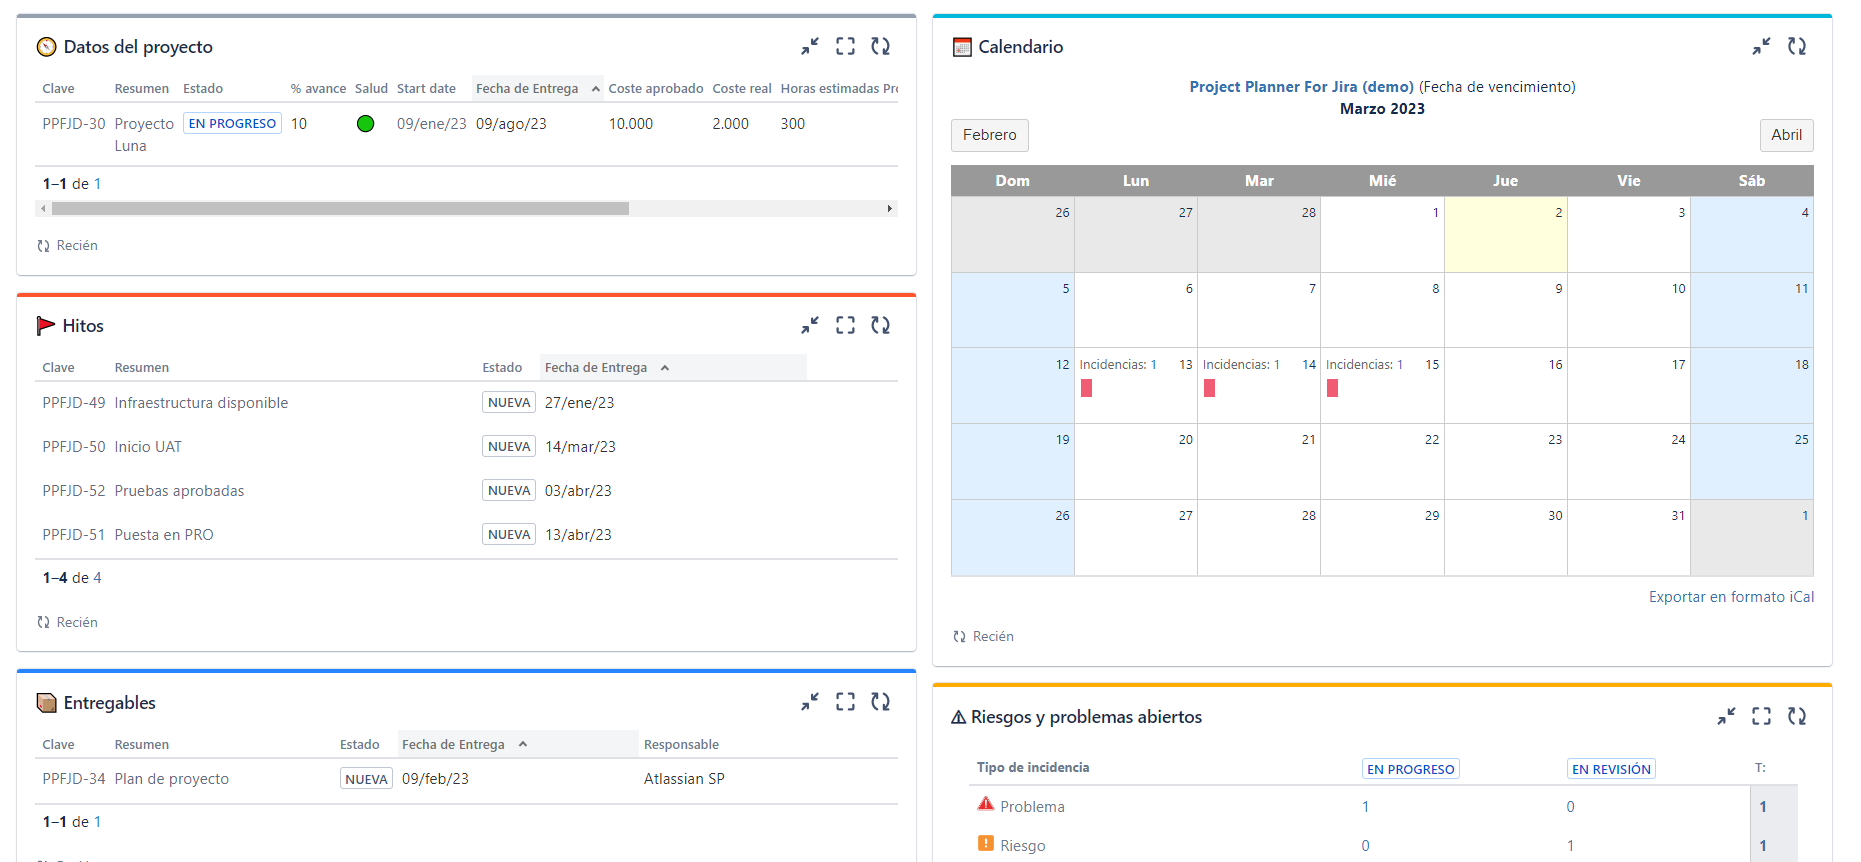 project-planner-for-jira-dashboards-visuales-y-utiles-8-51